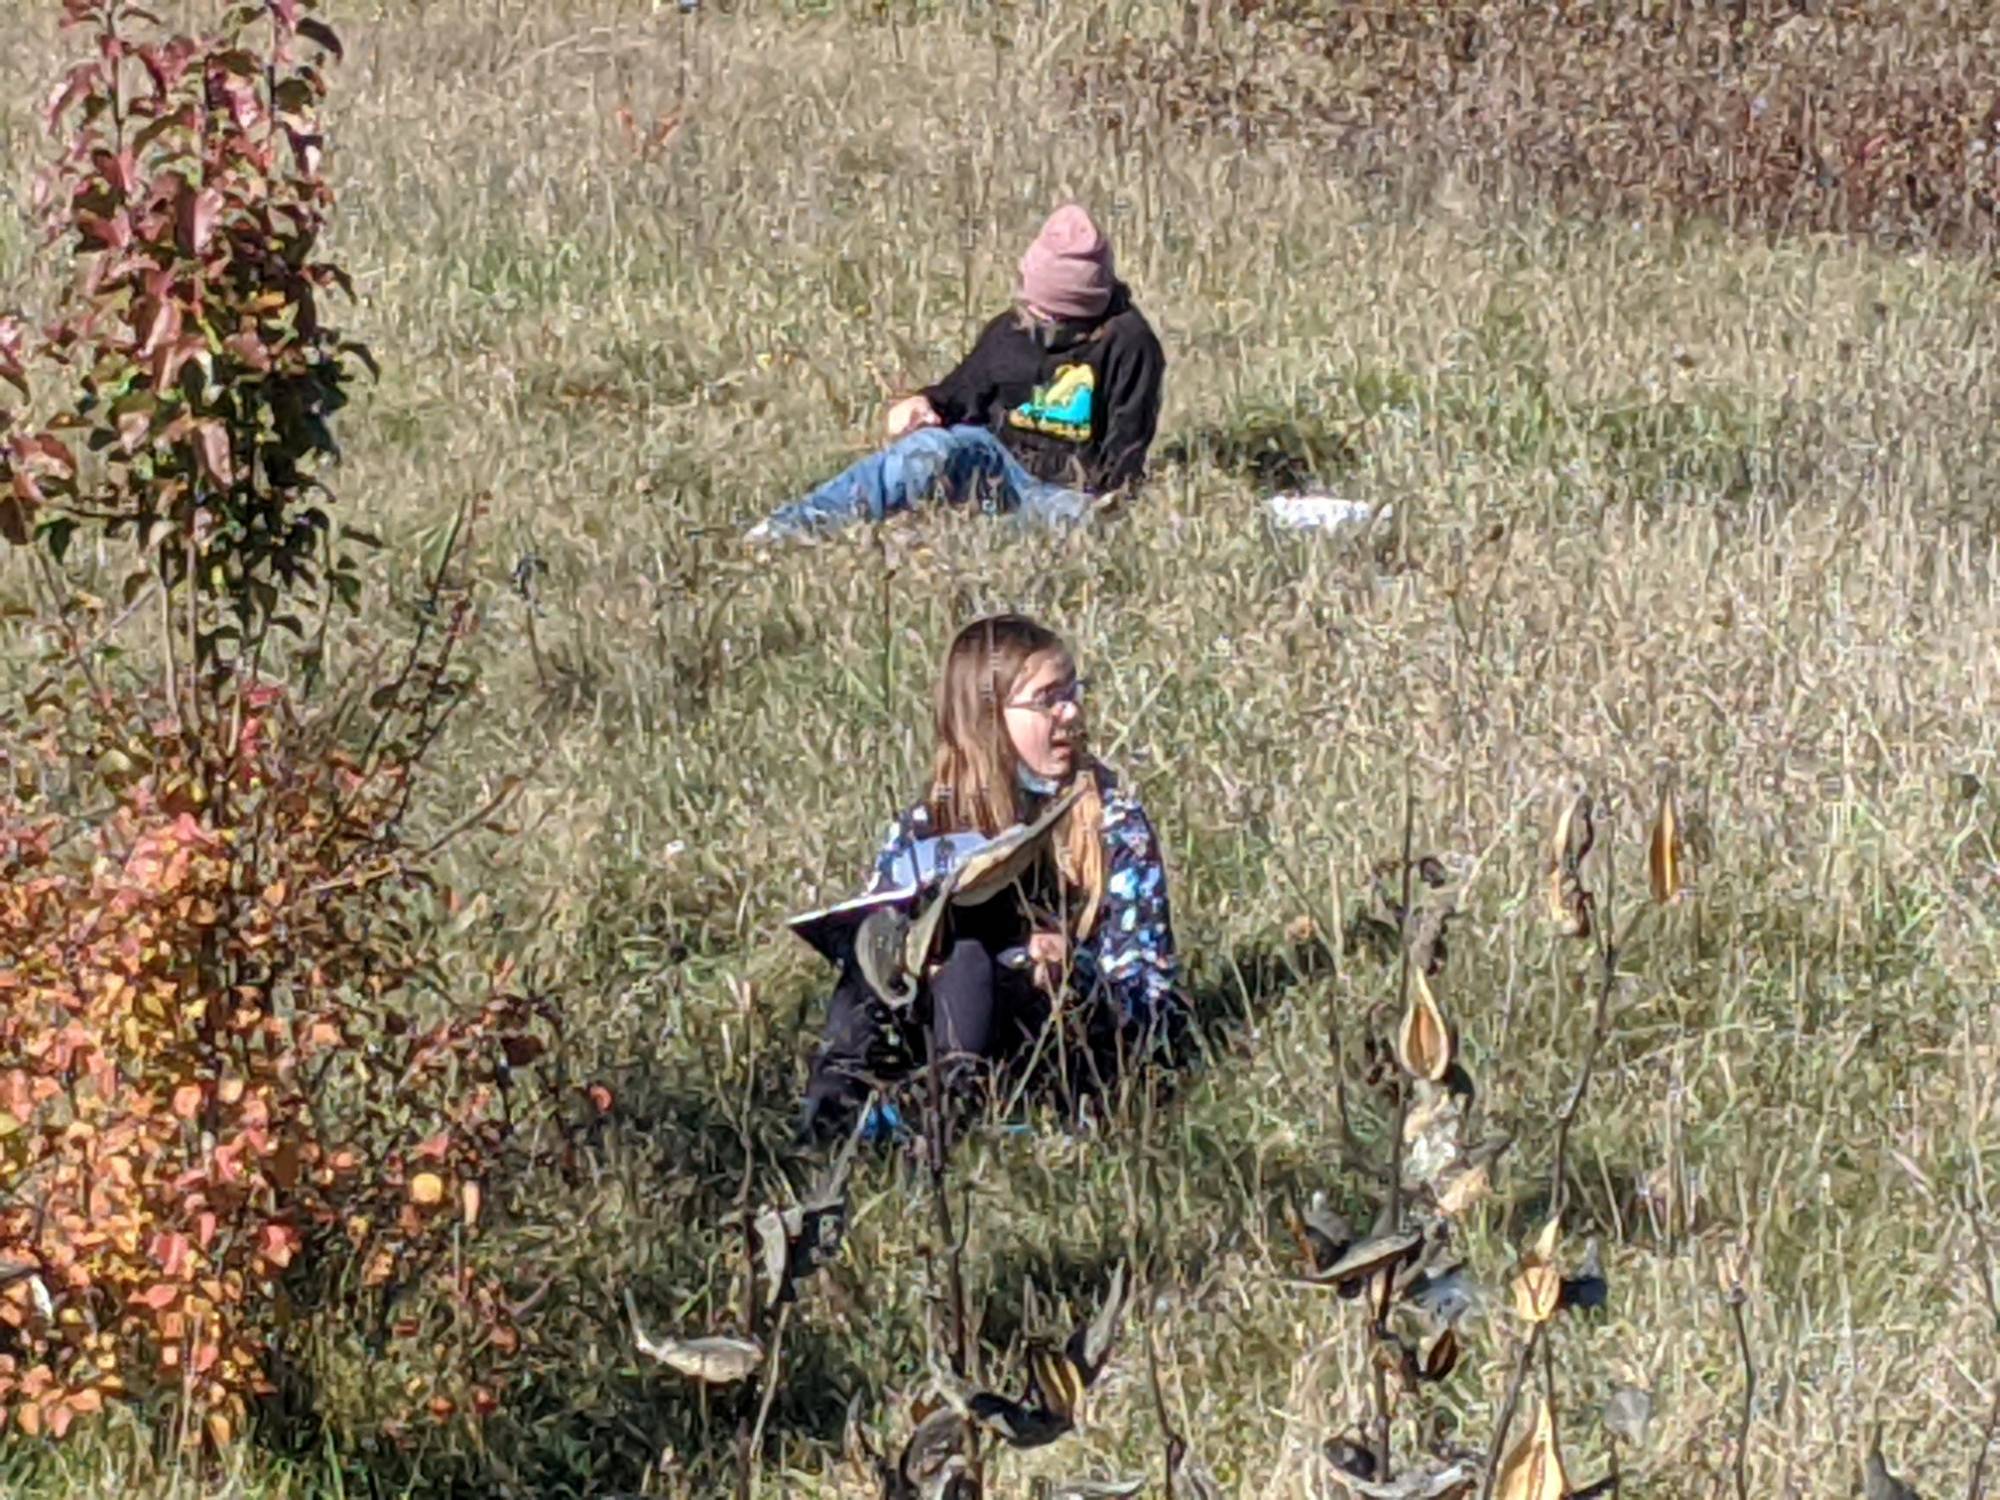 Students writing in notebooks while sitting in tall grass